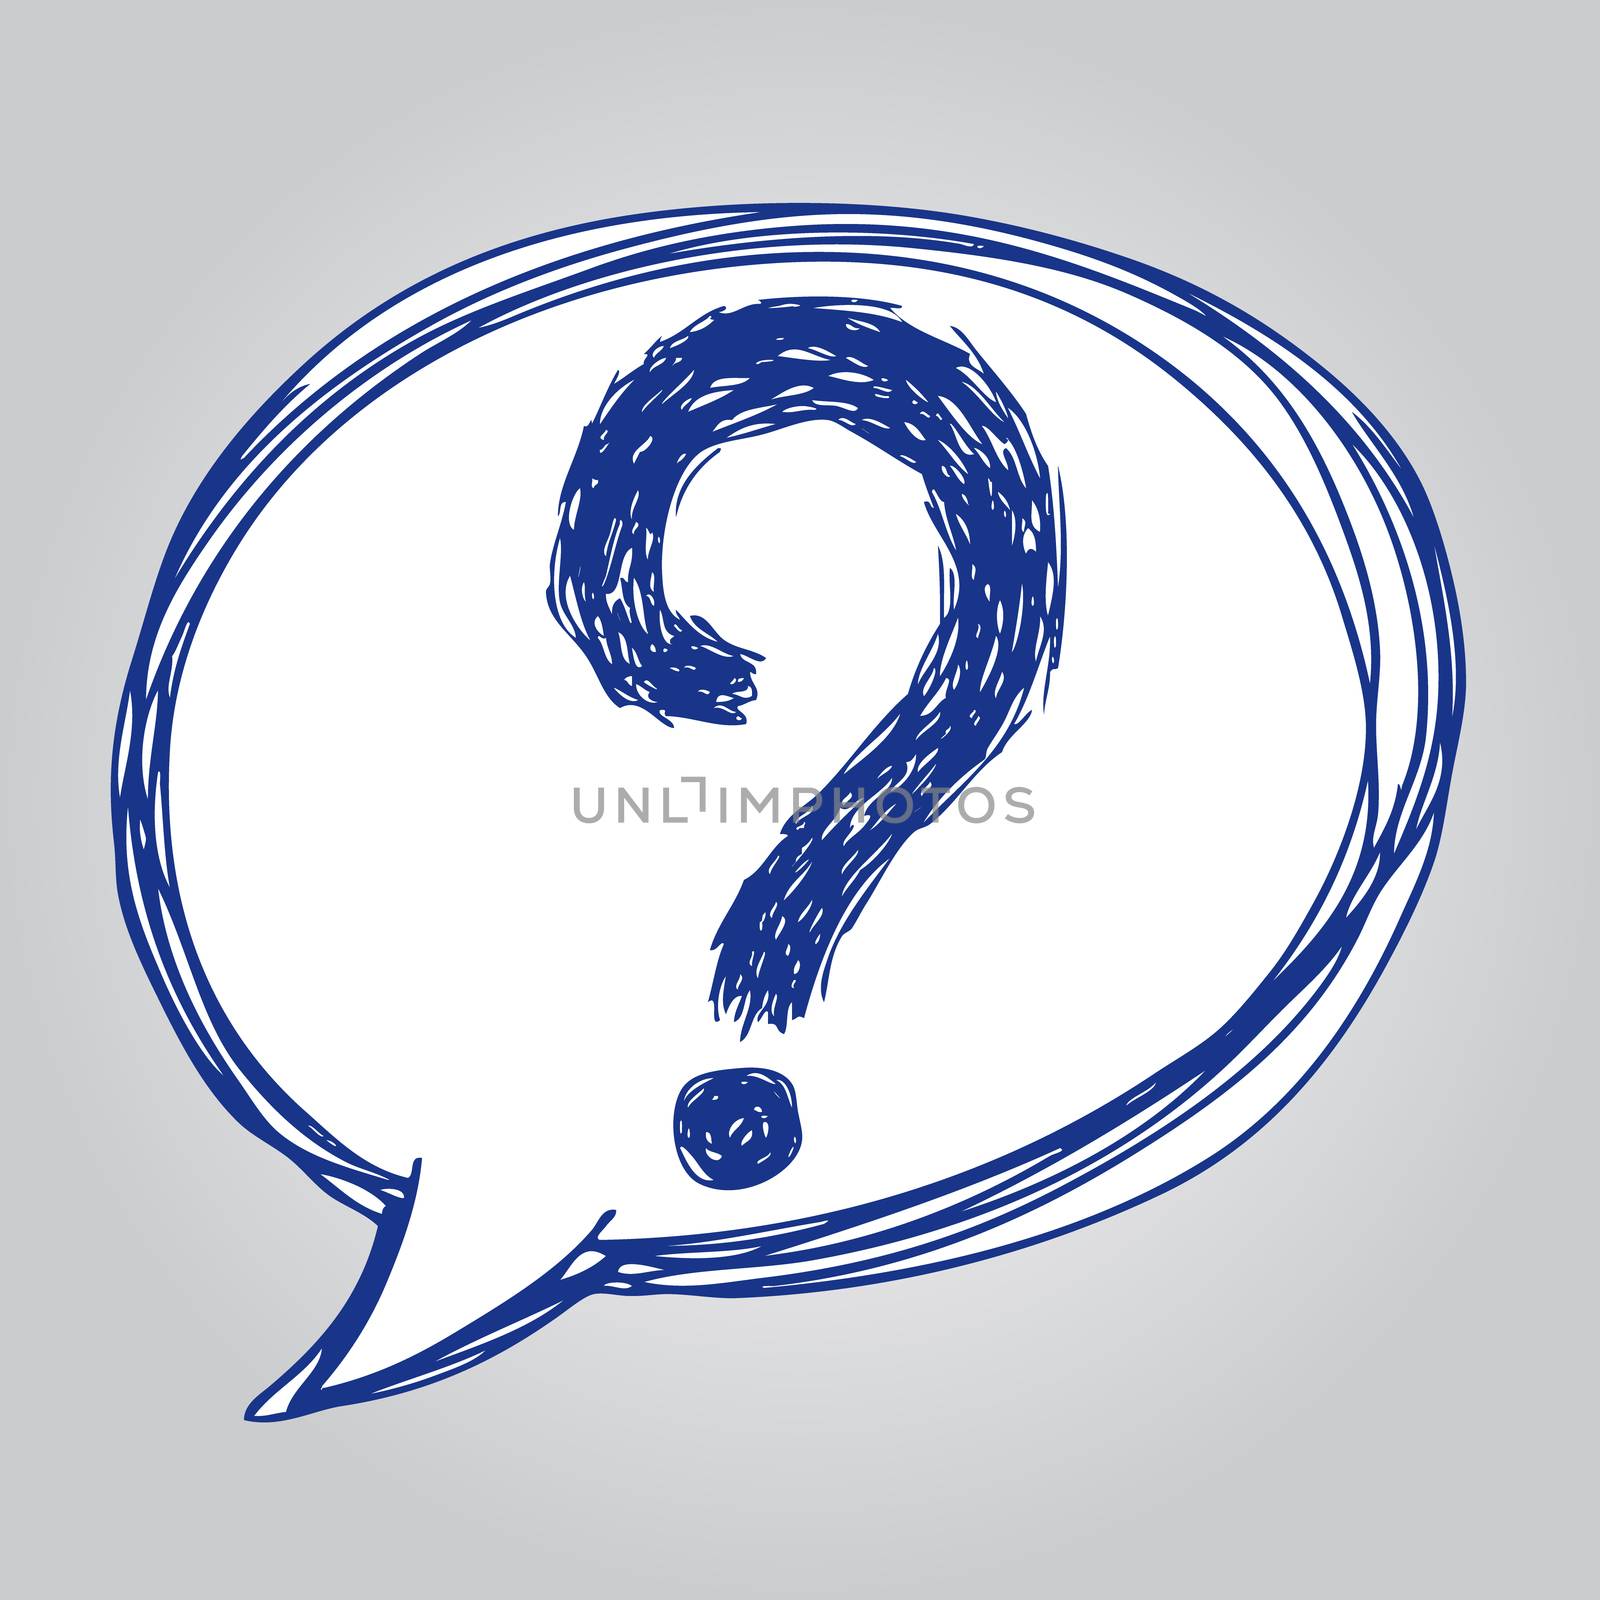 question marks in speech bubble icon by simpleBE